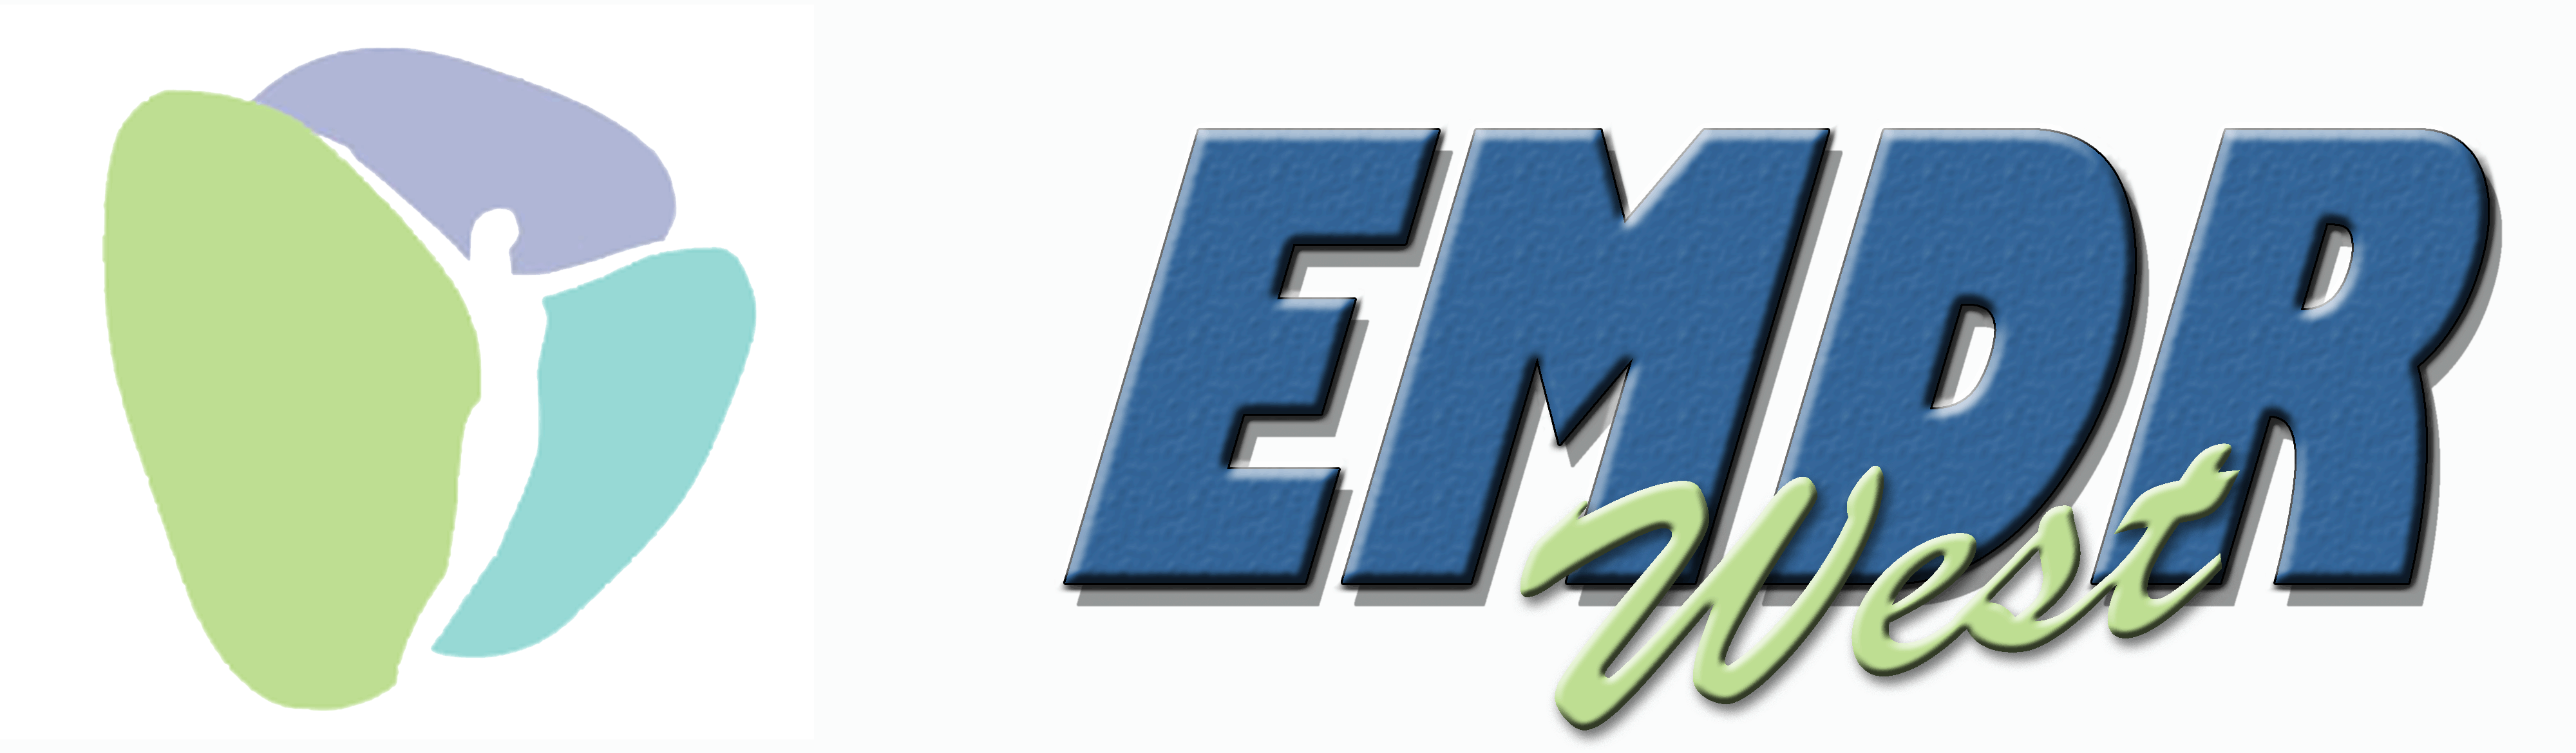 EMDR Therapy West Los Angeles Logo